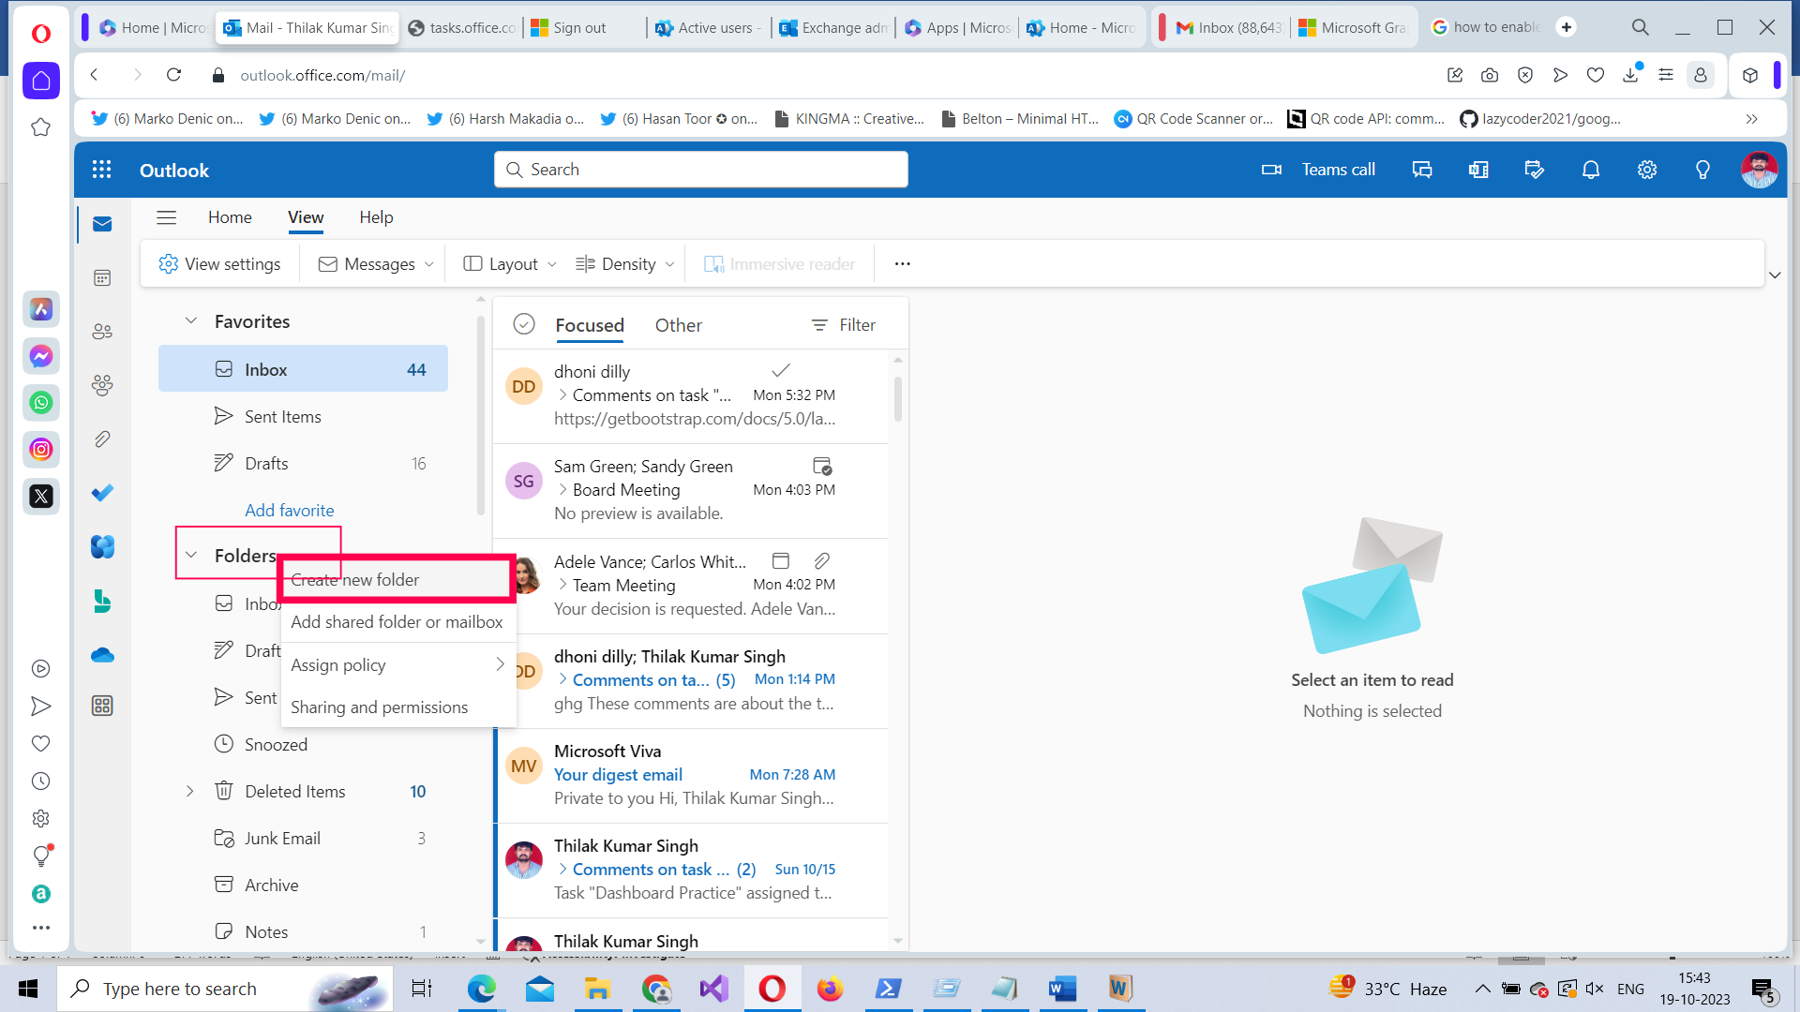 This screenshot explains how you create a new folder by right-clicking the folders option in the Microsoft 365 Outlook web app.